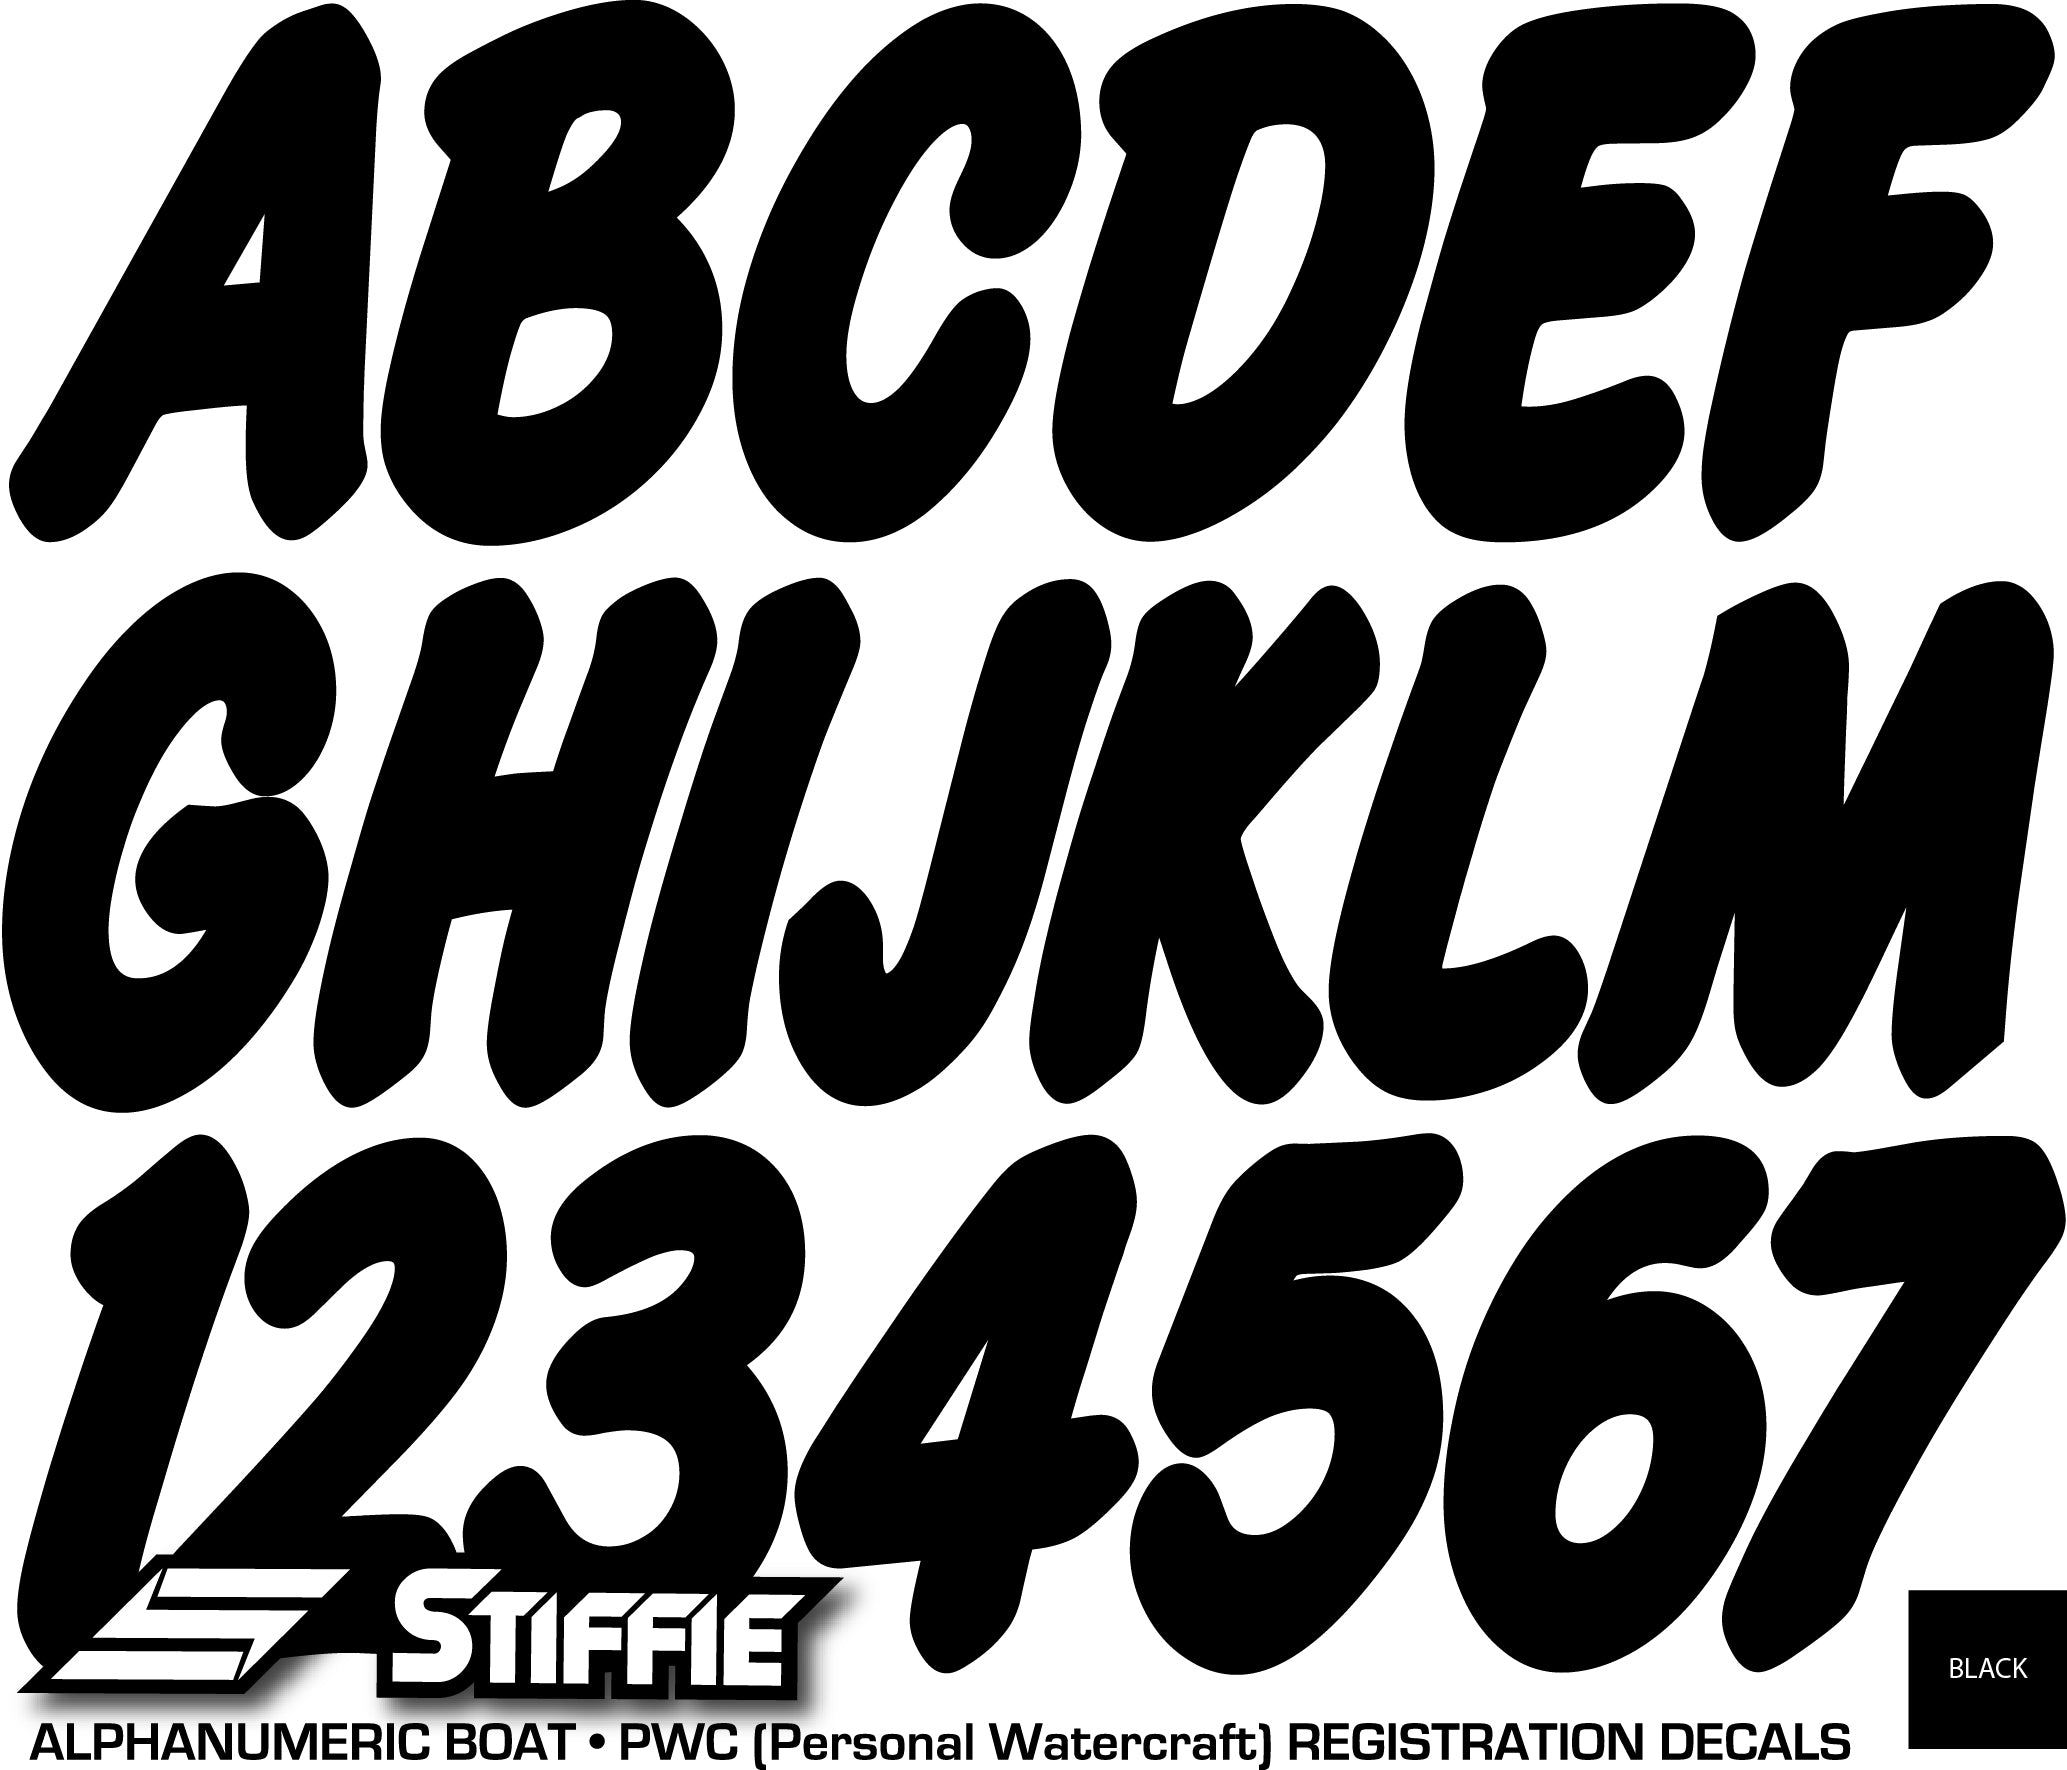 STIFFIE Whip-One Black 3" Alpha-Numeric Registration Identification Numbers Stickers Decals for Boats & Personal Watercraft